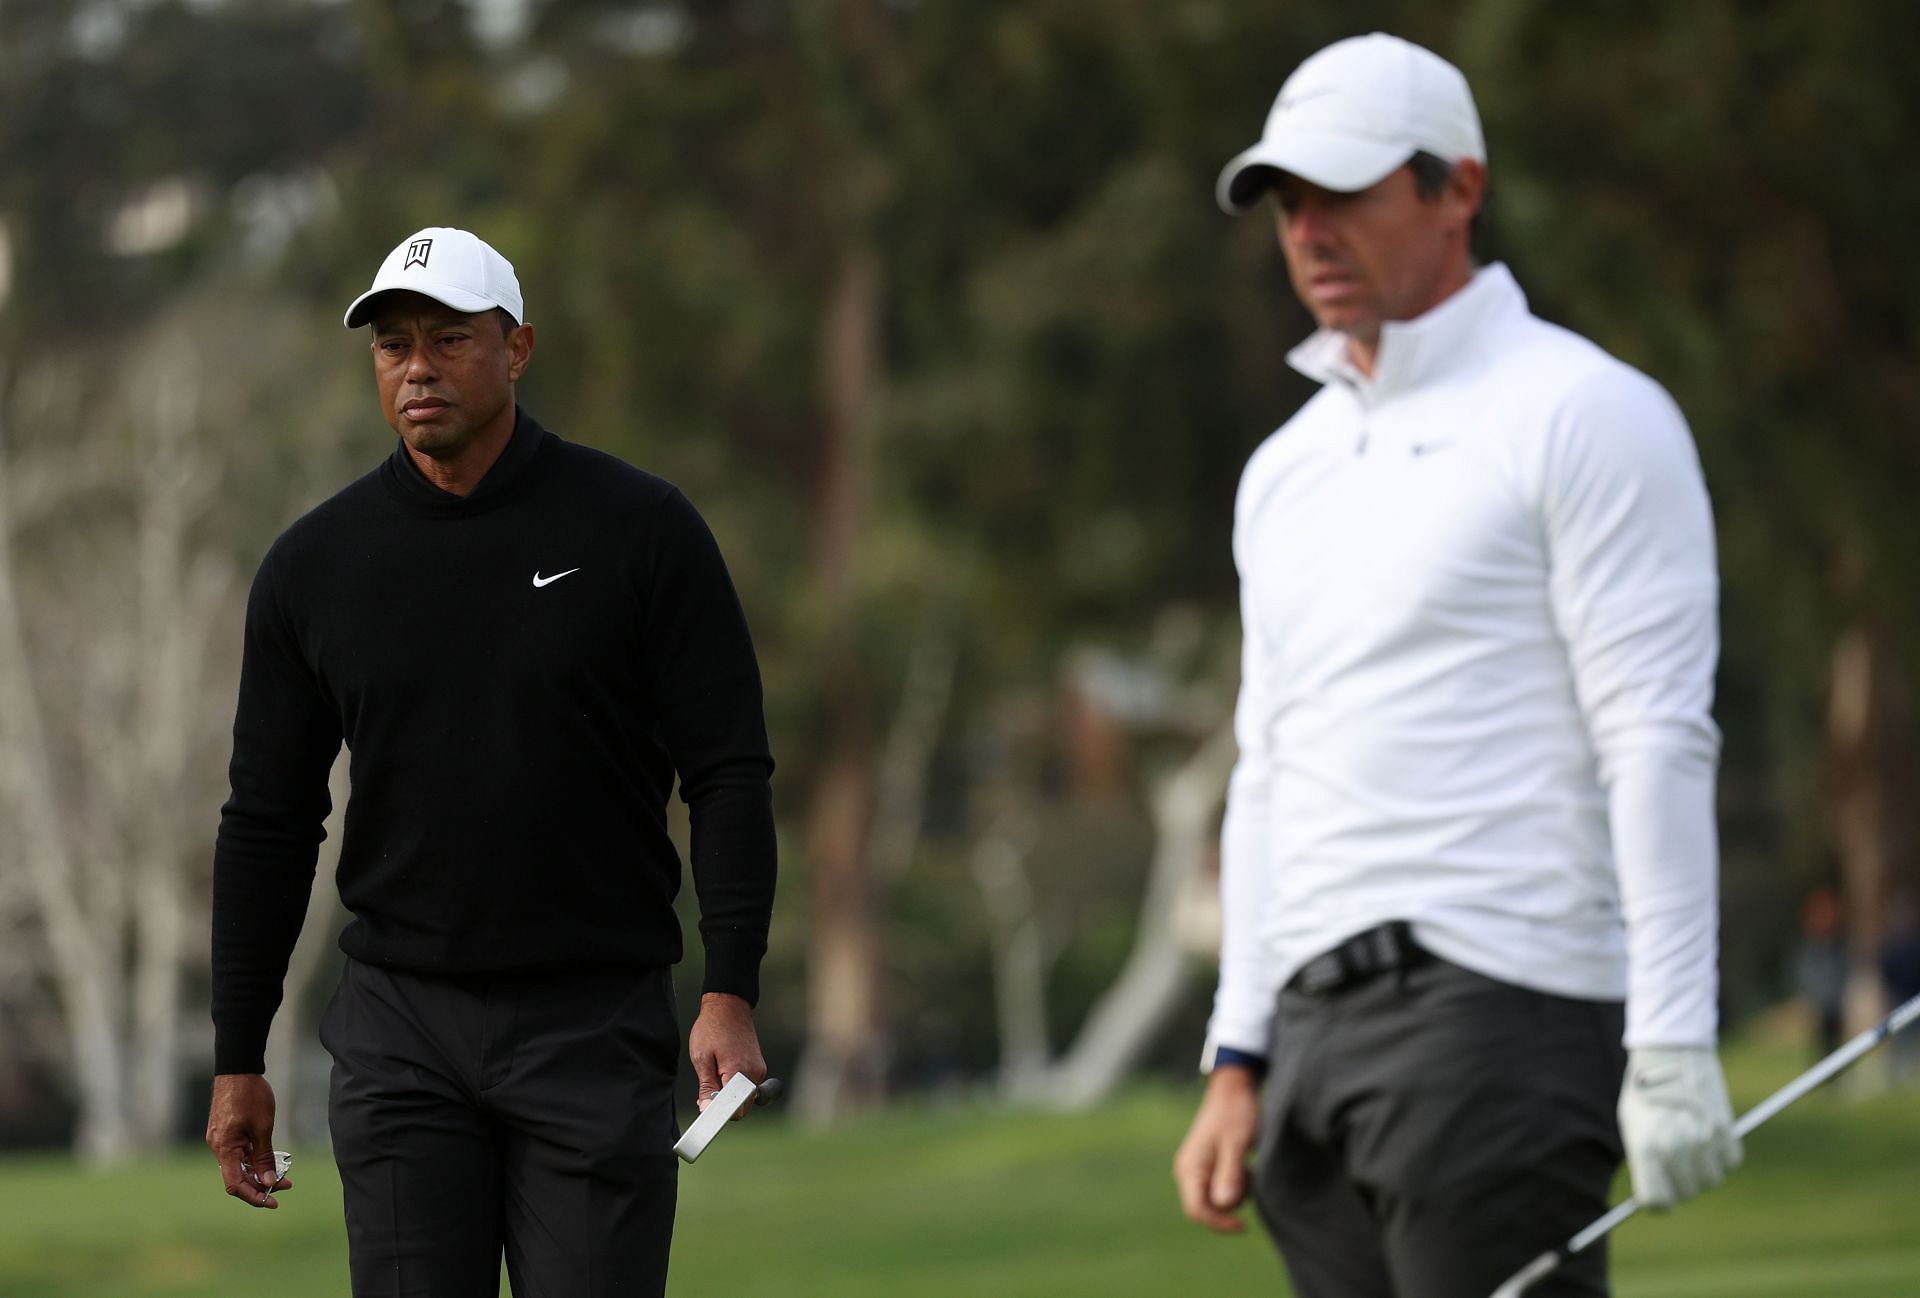 Tiger Woods and Rory McIlroy at the Genesis Invitational